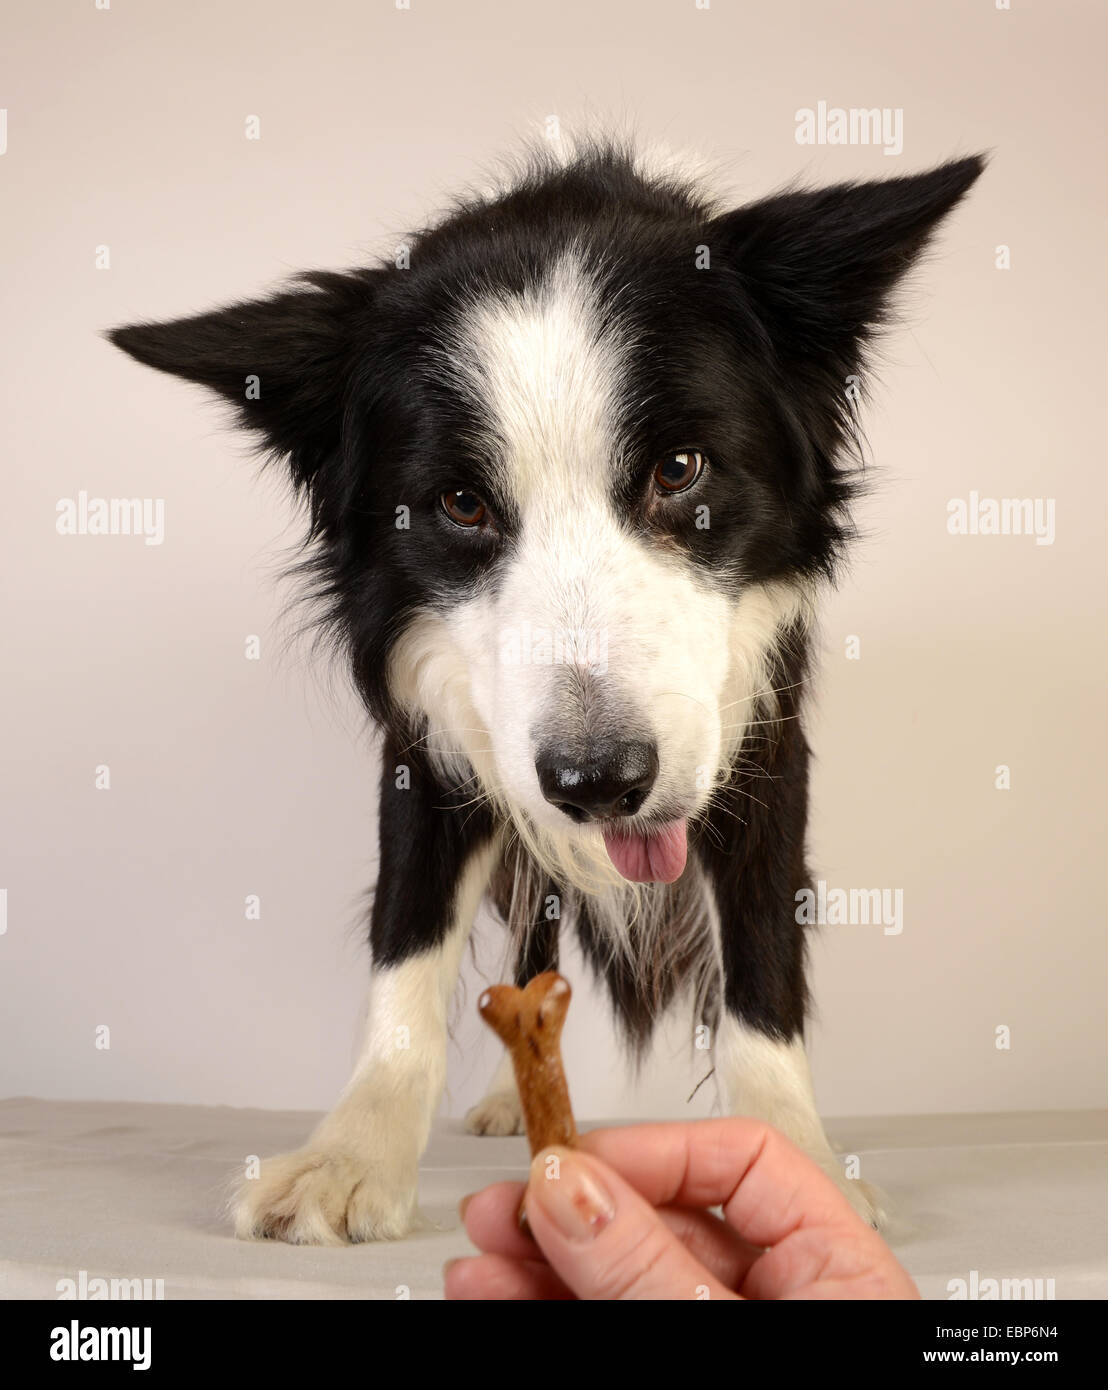 Chien Border Collie a remis une gâterie biscuit animal animaux animaux uk Banque D'Images